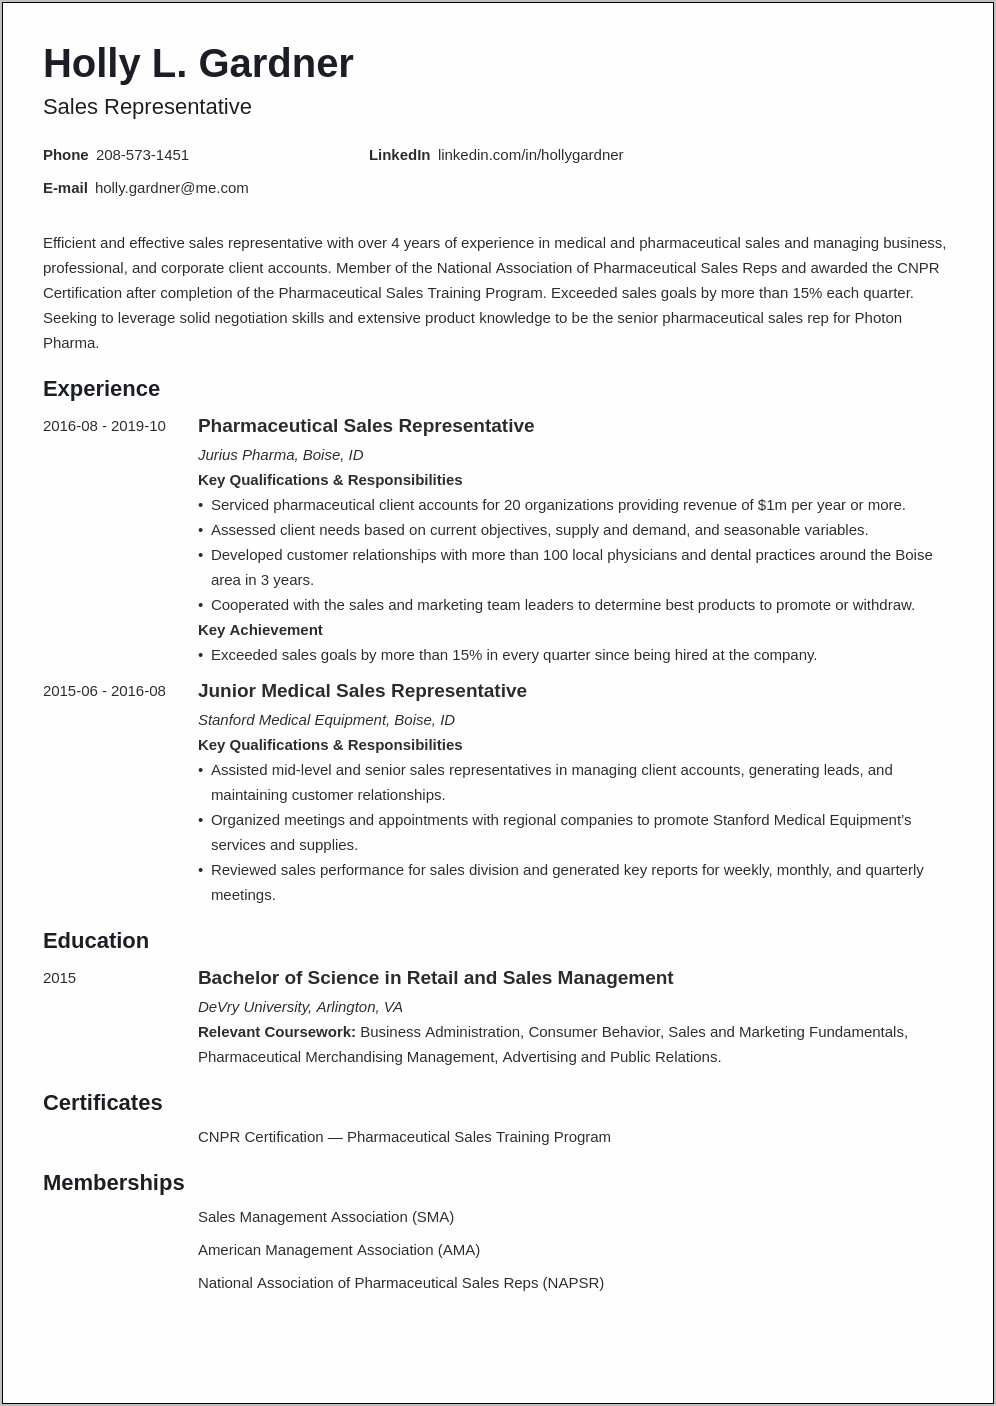 Real Estate Inside Sales Agent Resume Example